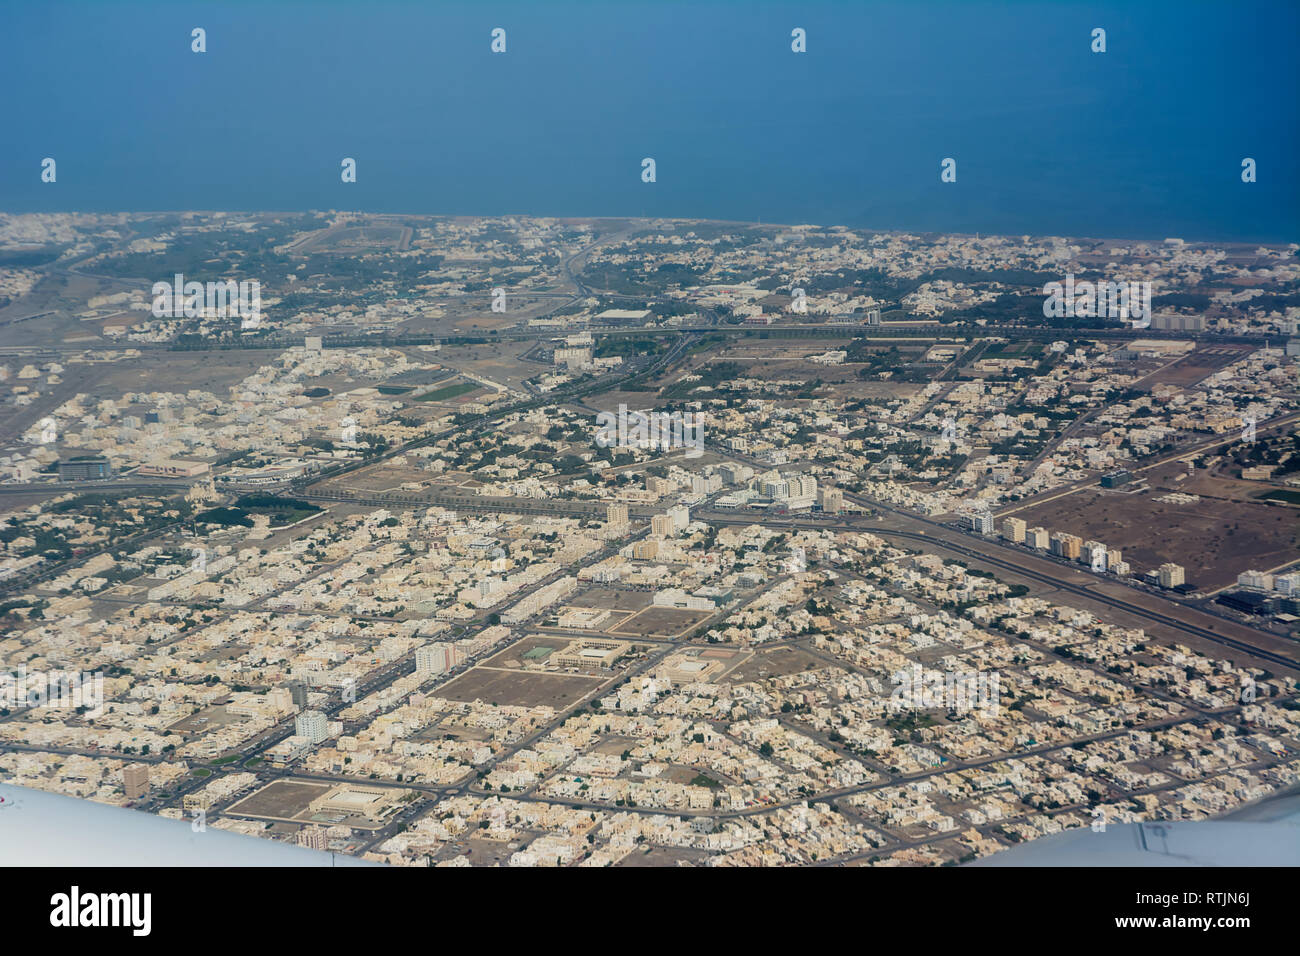 View from the plane of the city of Seeb, near Muscat (Oman) Stock Photo